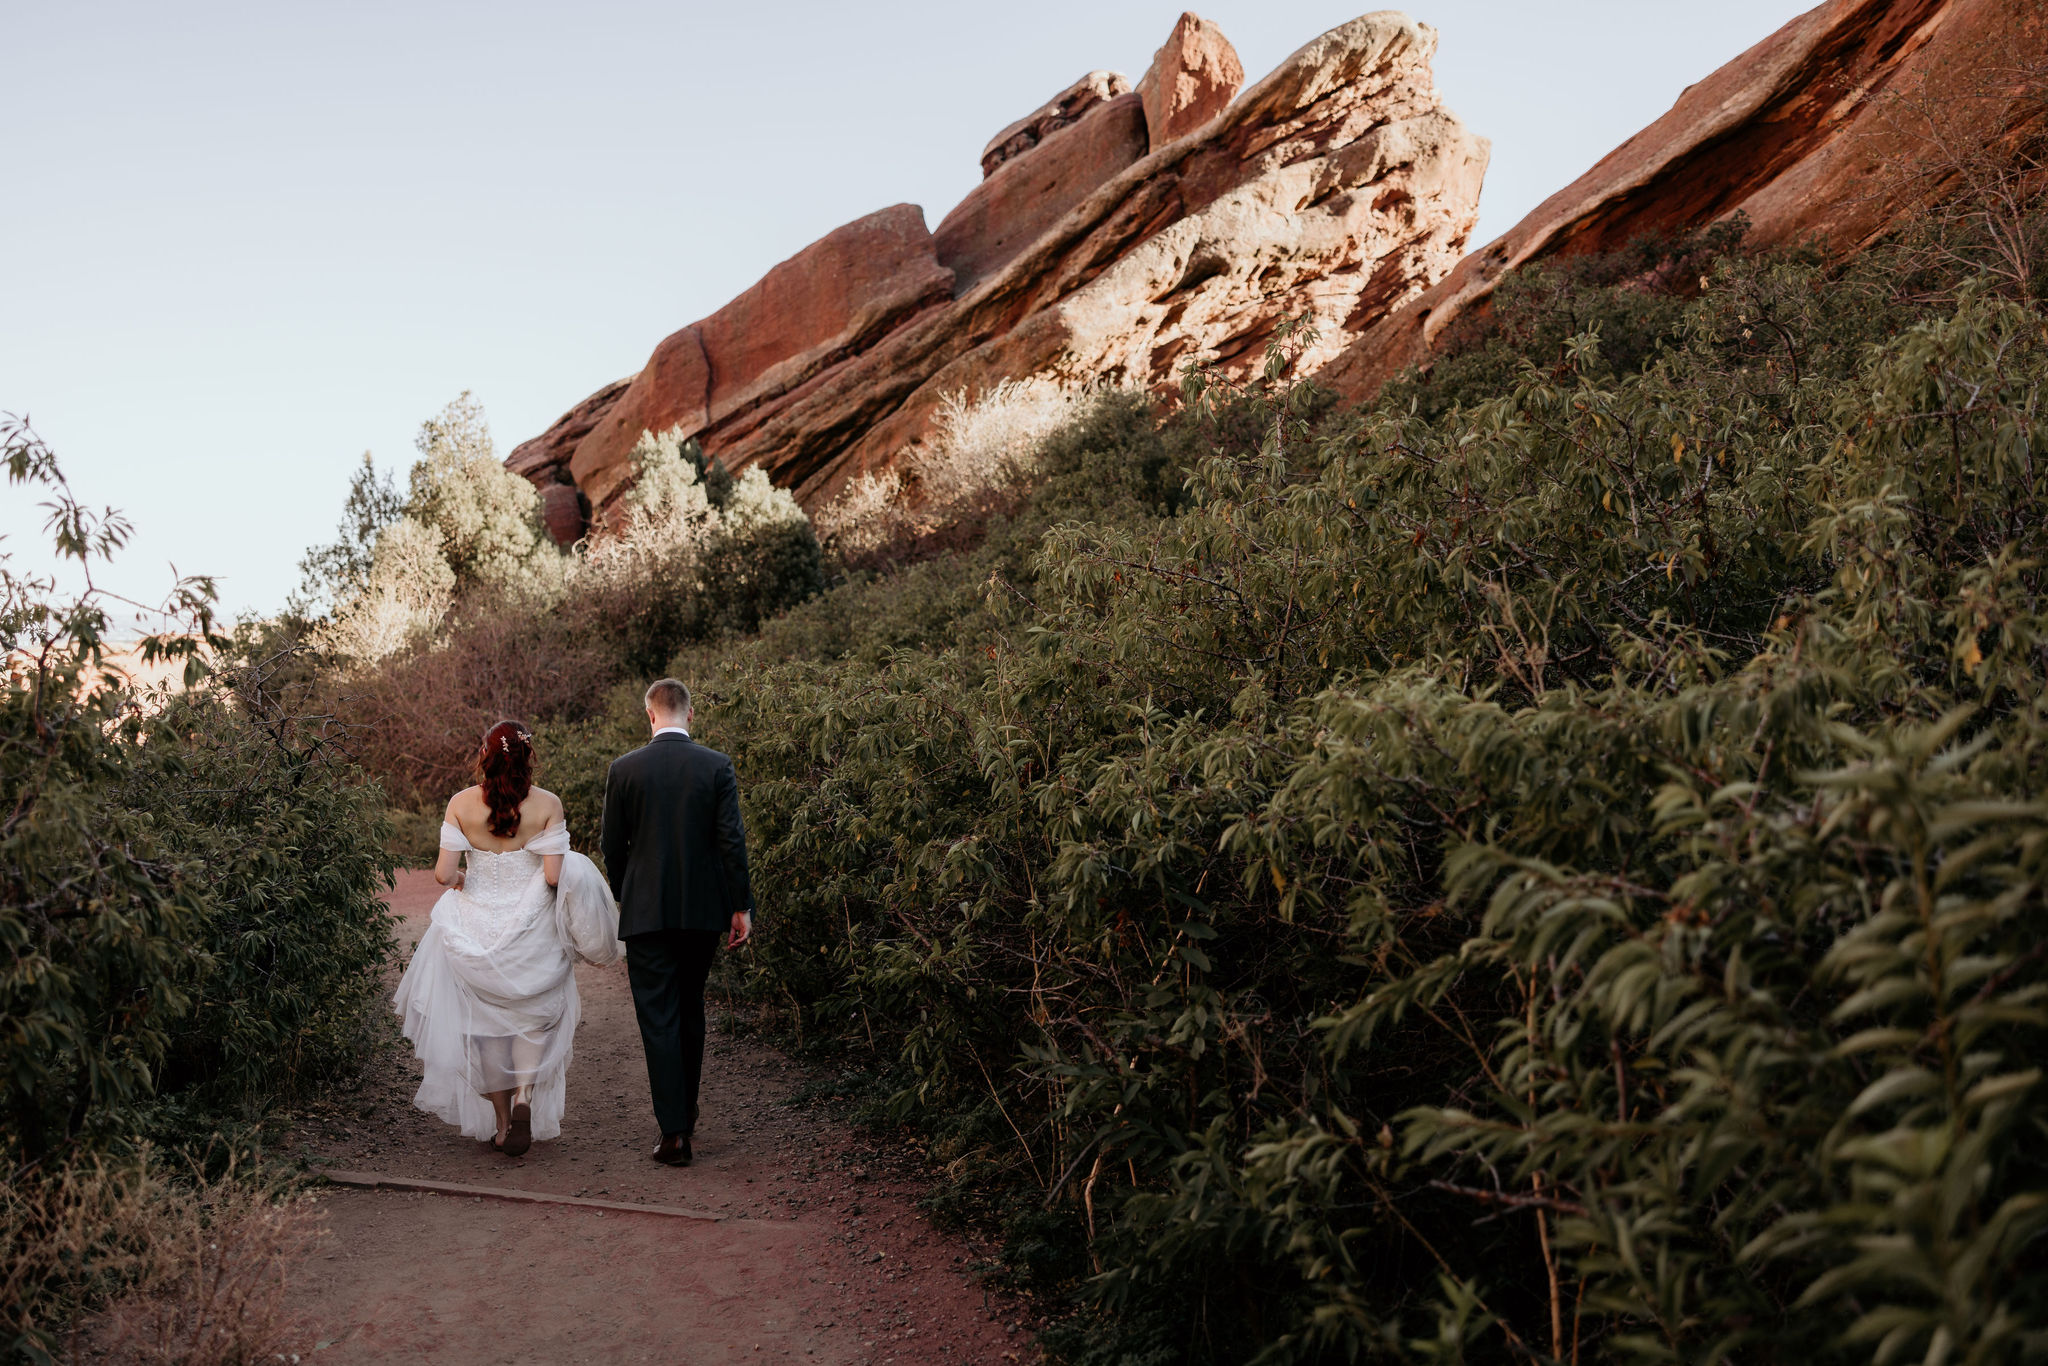 bride and groom walk along dirt path during colorado elopement at red rocks amphitheatre.